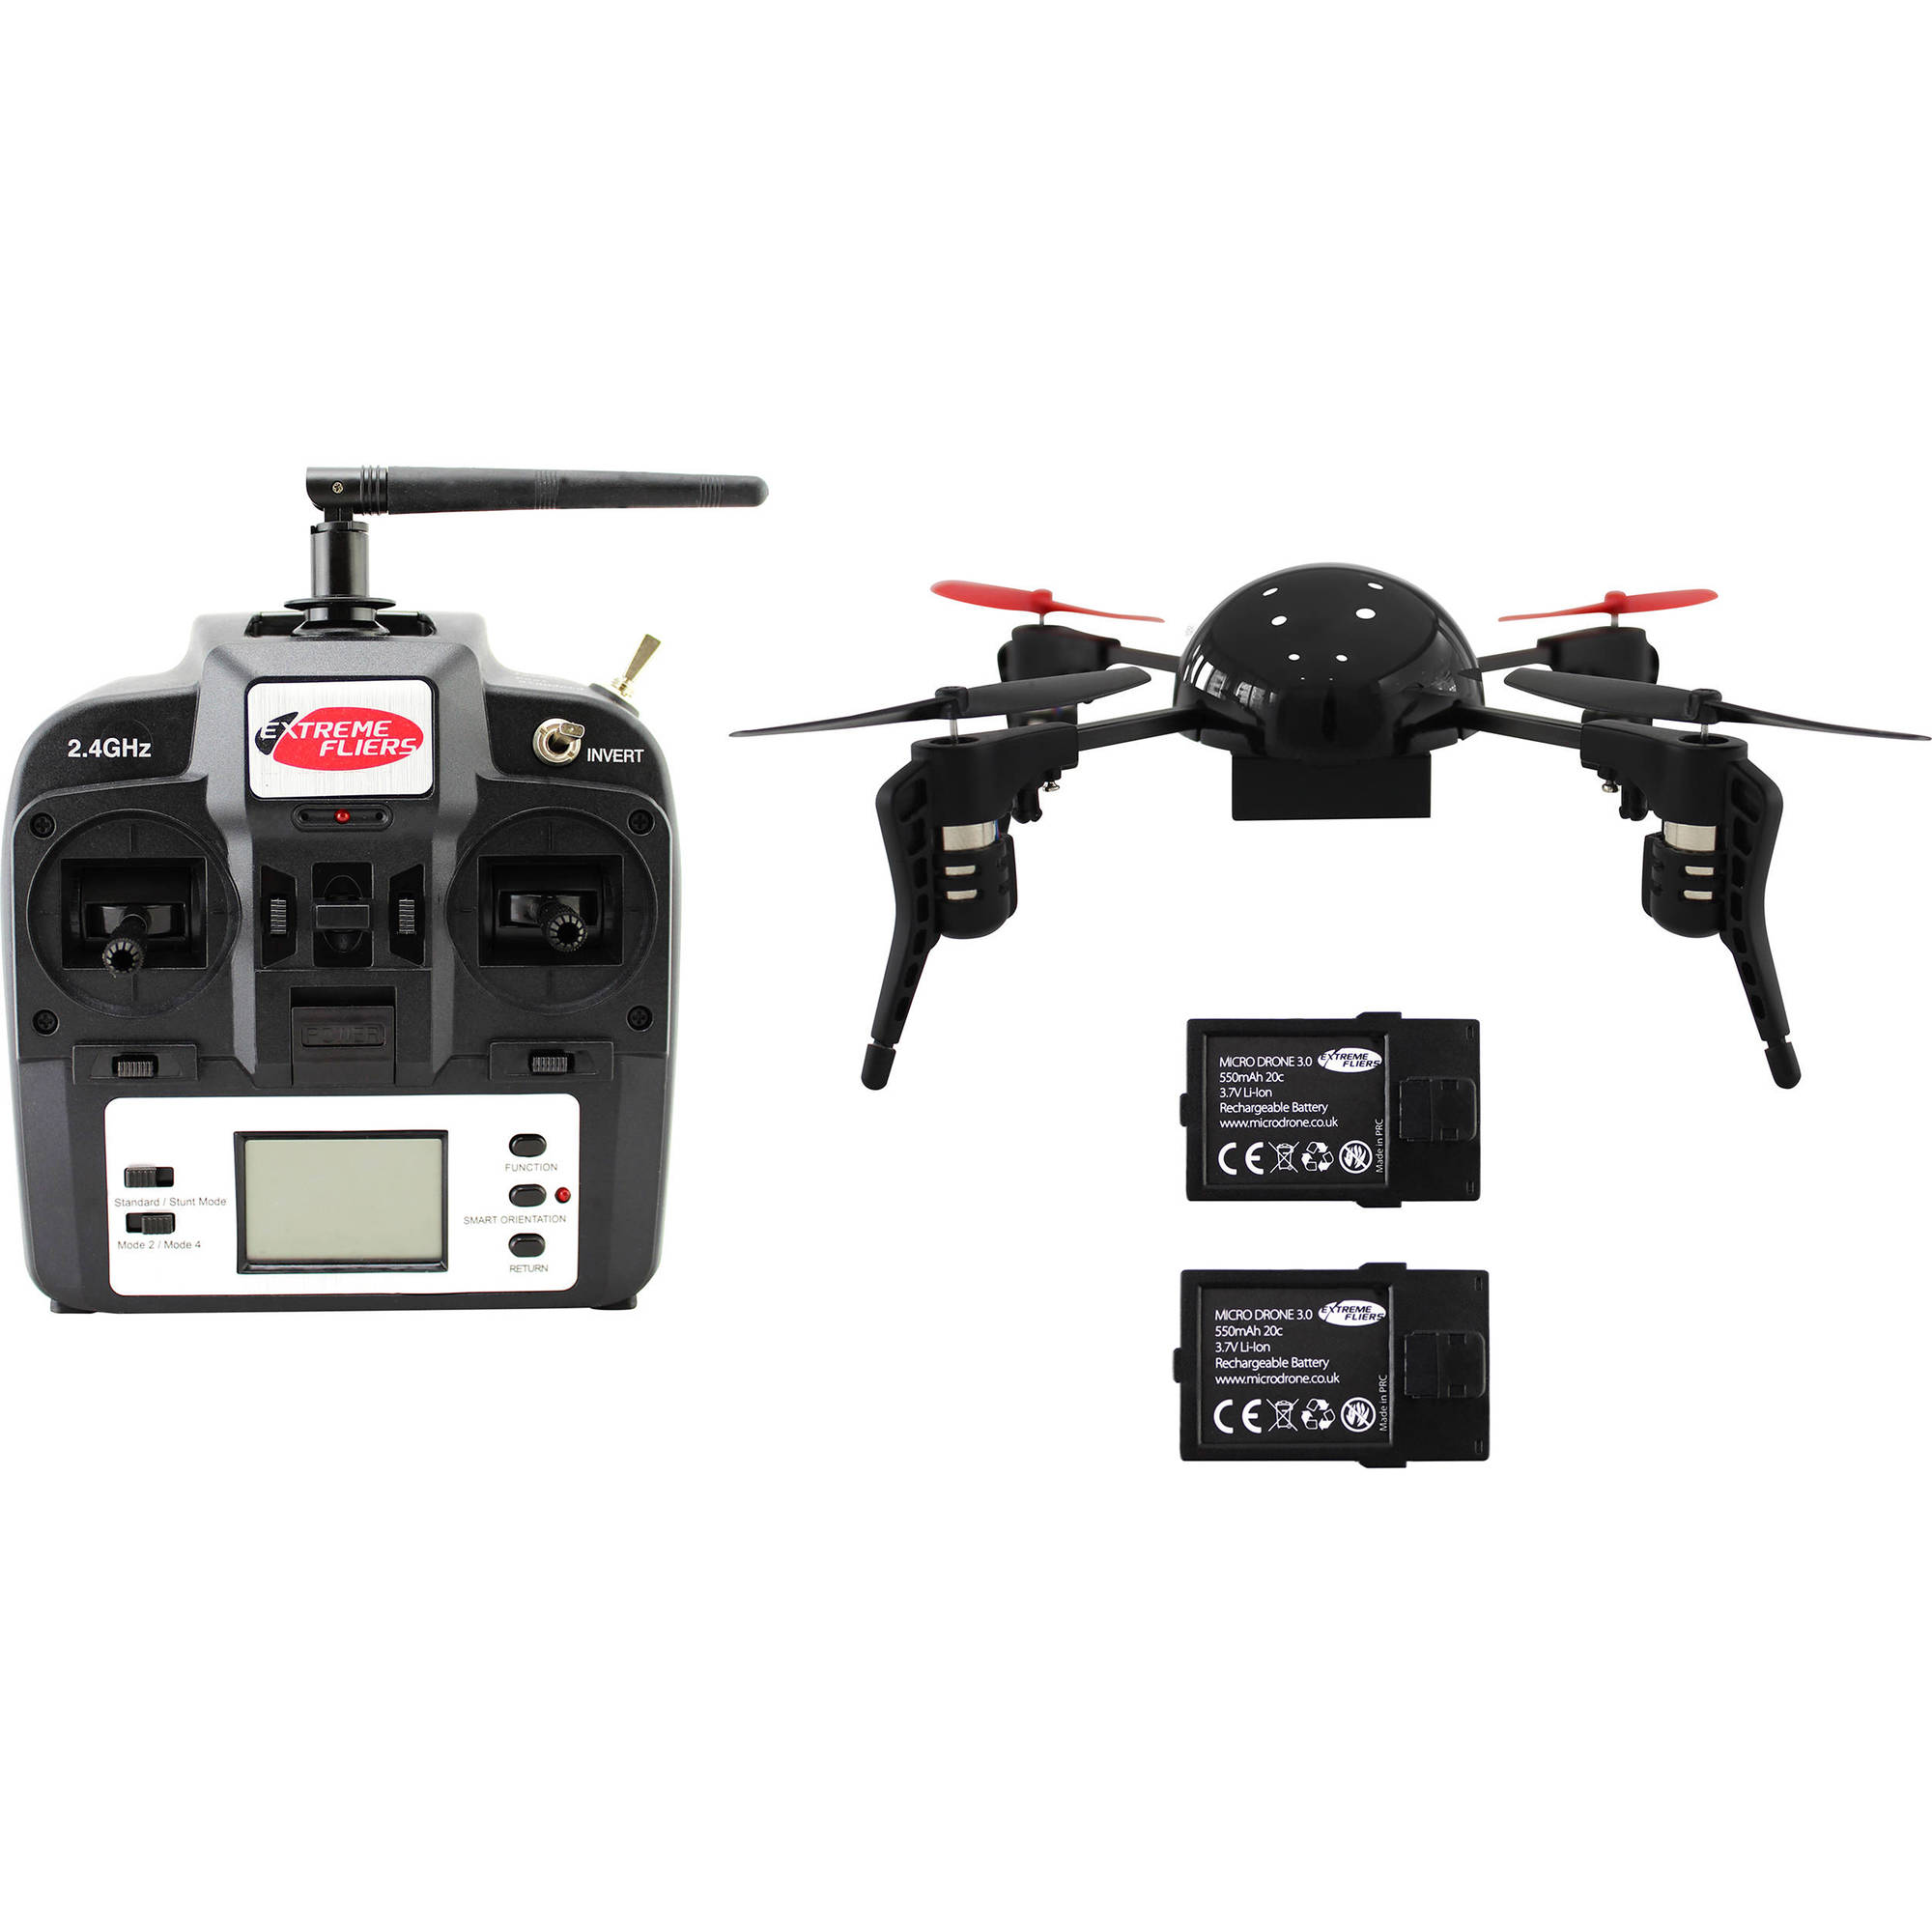 micro drone 3.0 combo pack